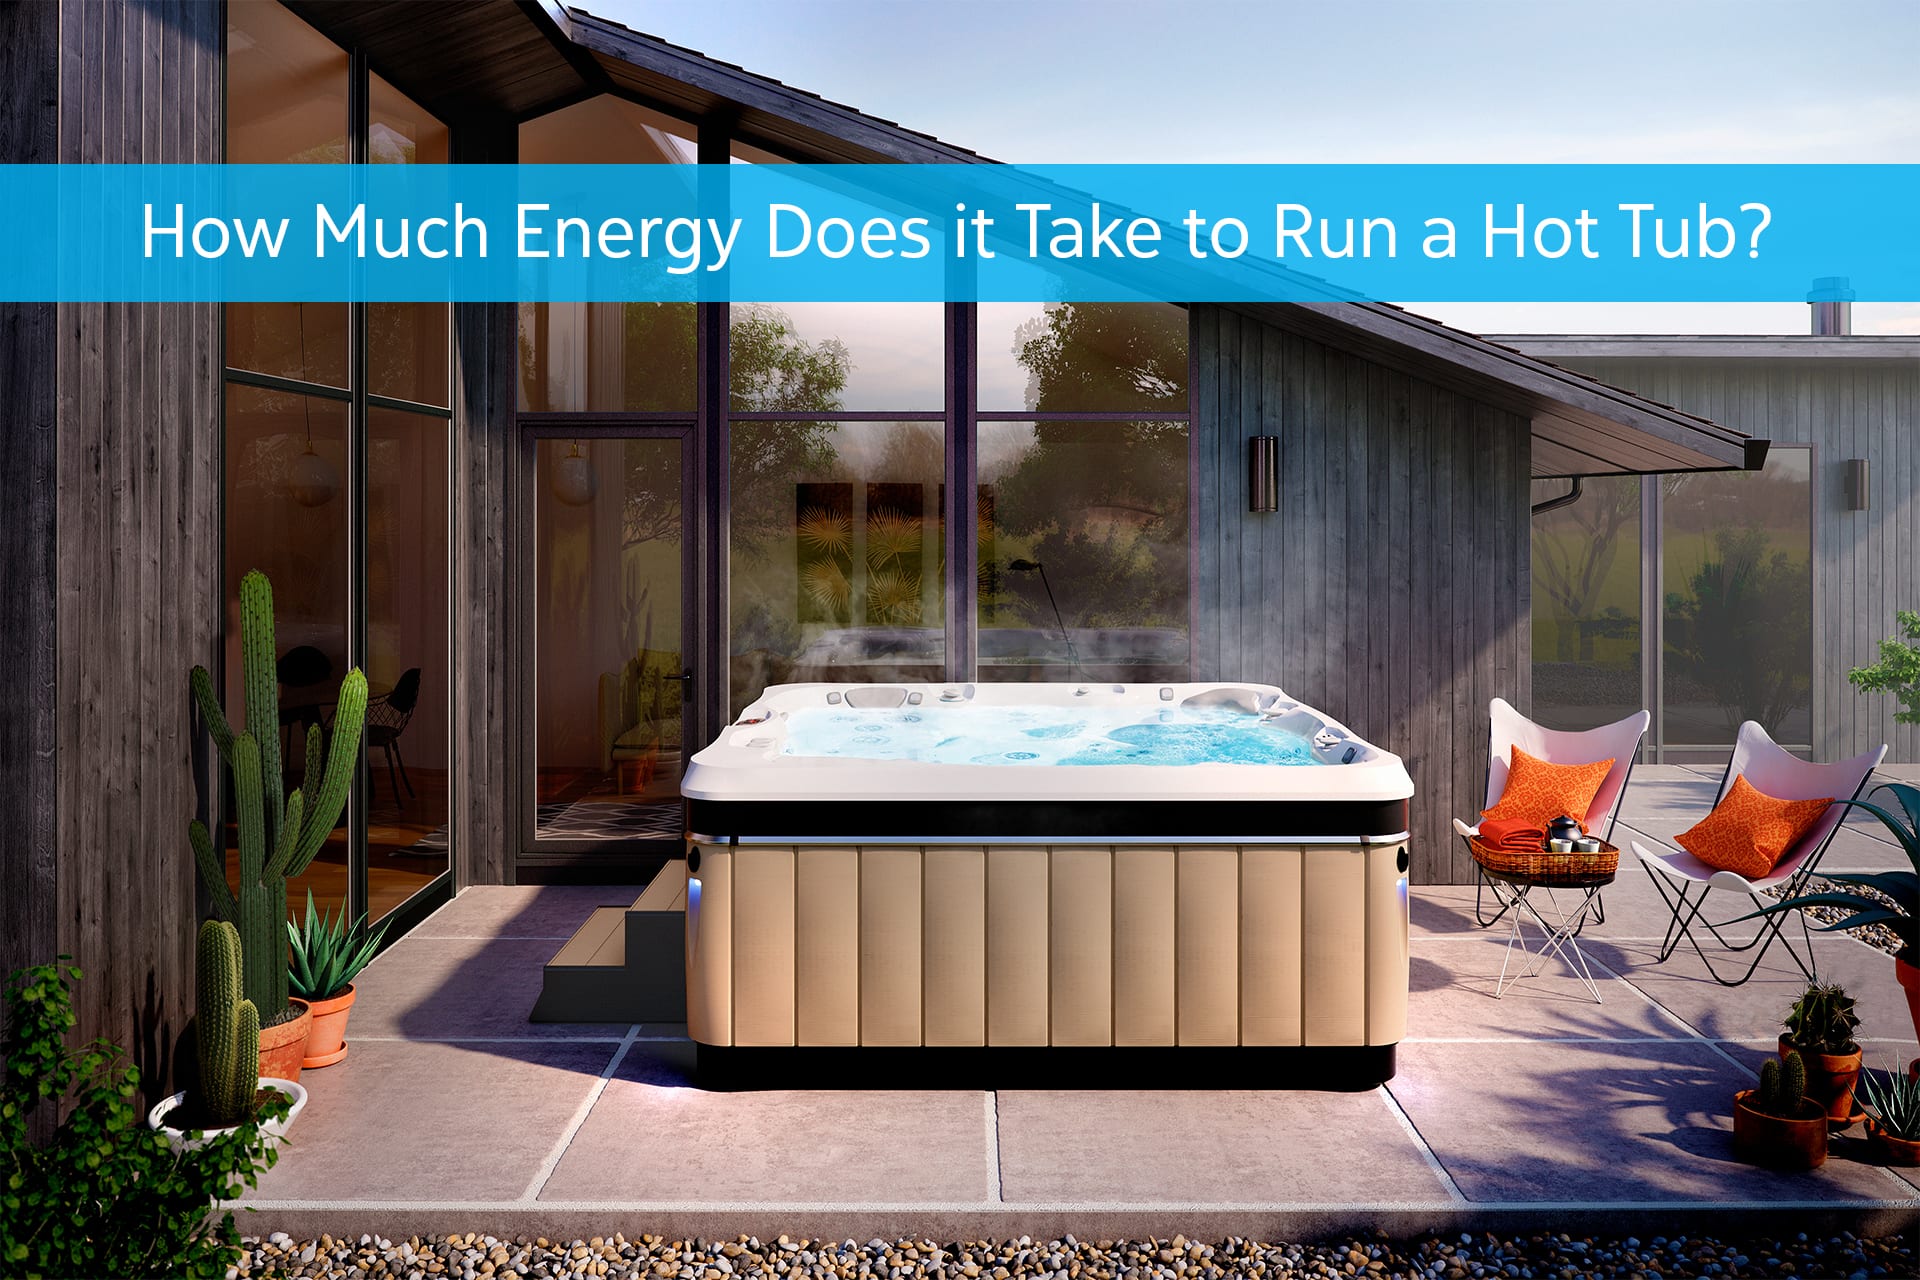 How Much Energy Does it Take to Run a Hot Tub?